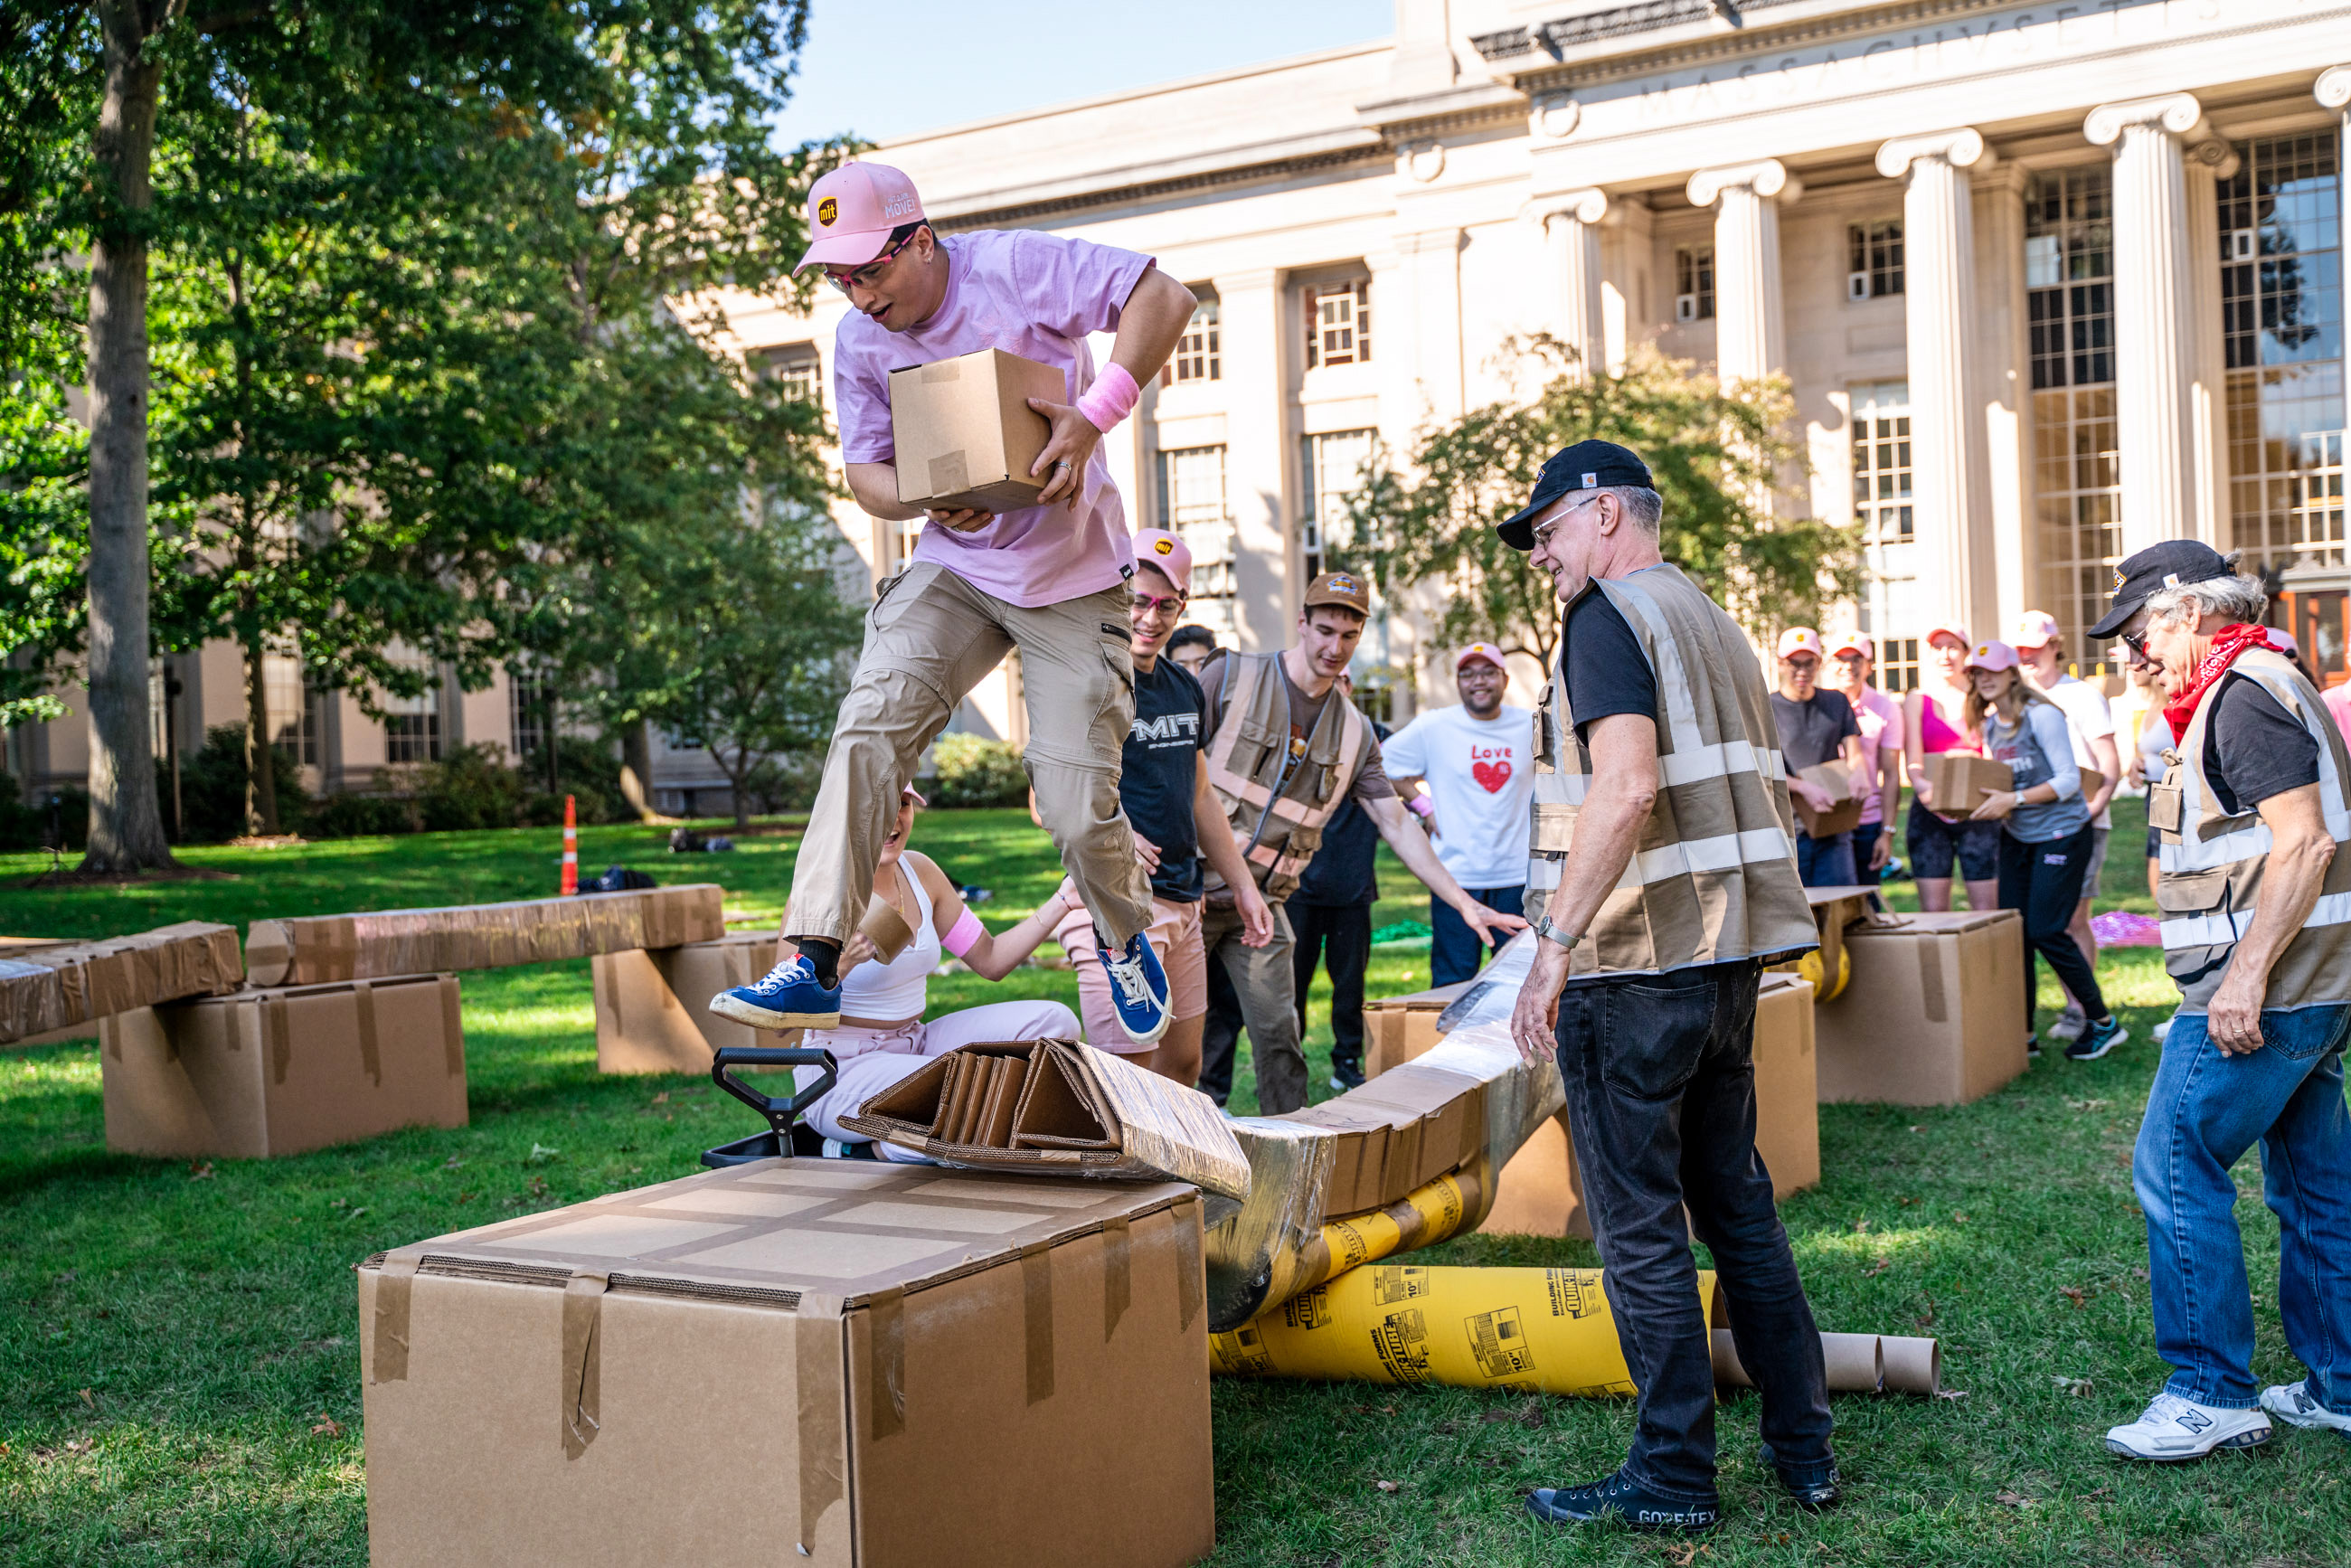 A student is crossing a cardboard brige on the campus lawn while other students watch.